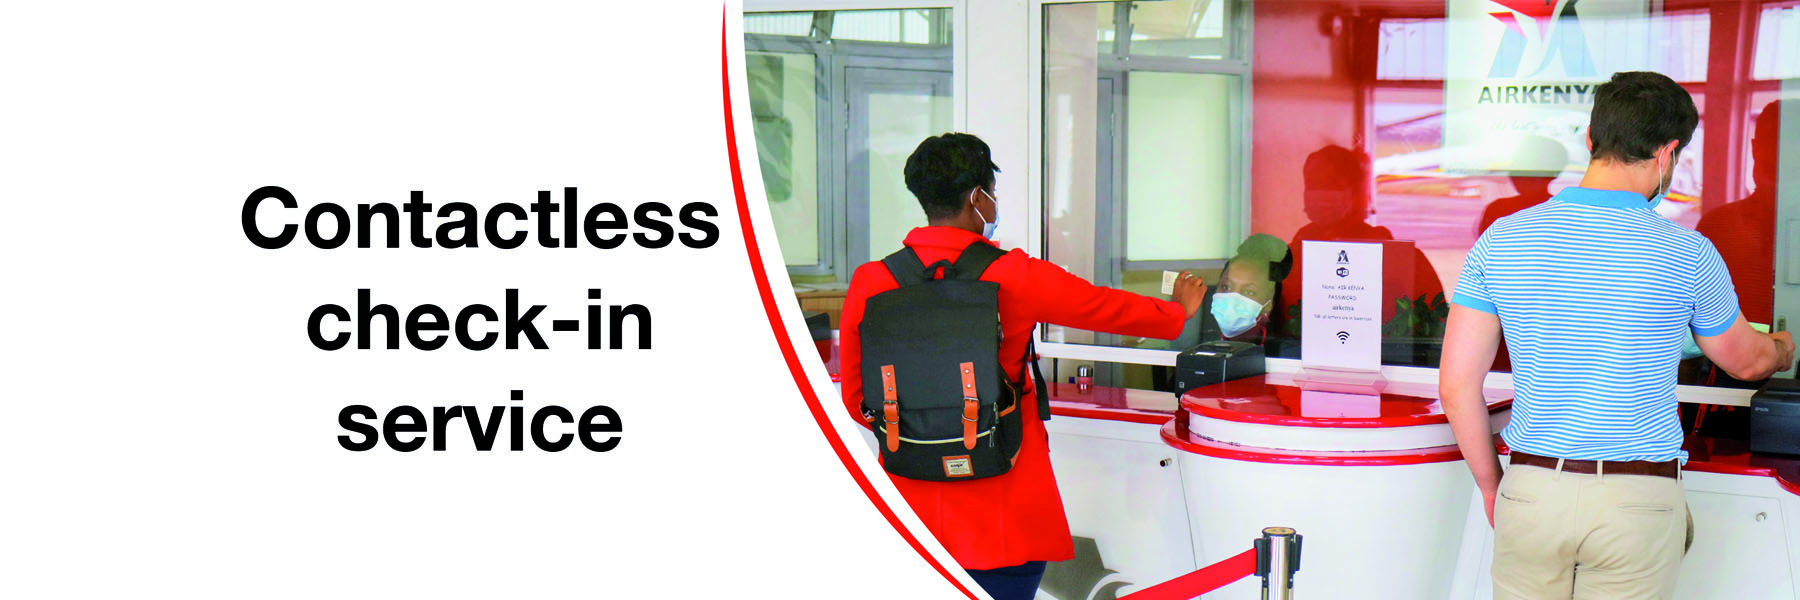 Airkenya contactless check-in service